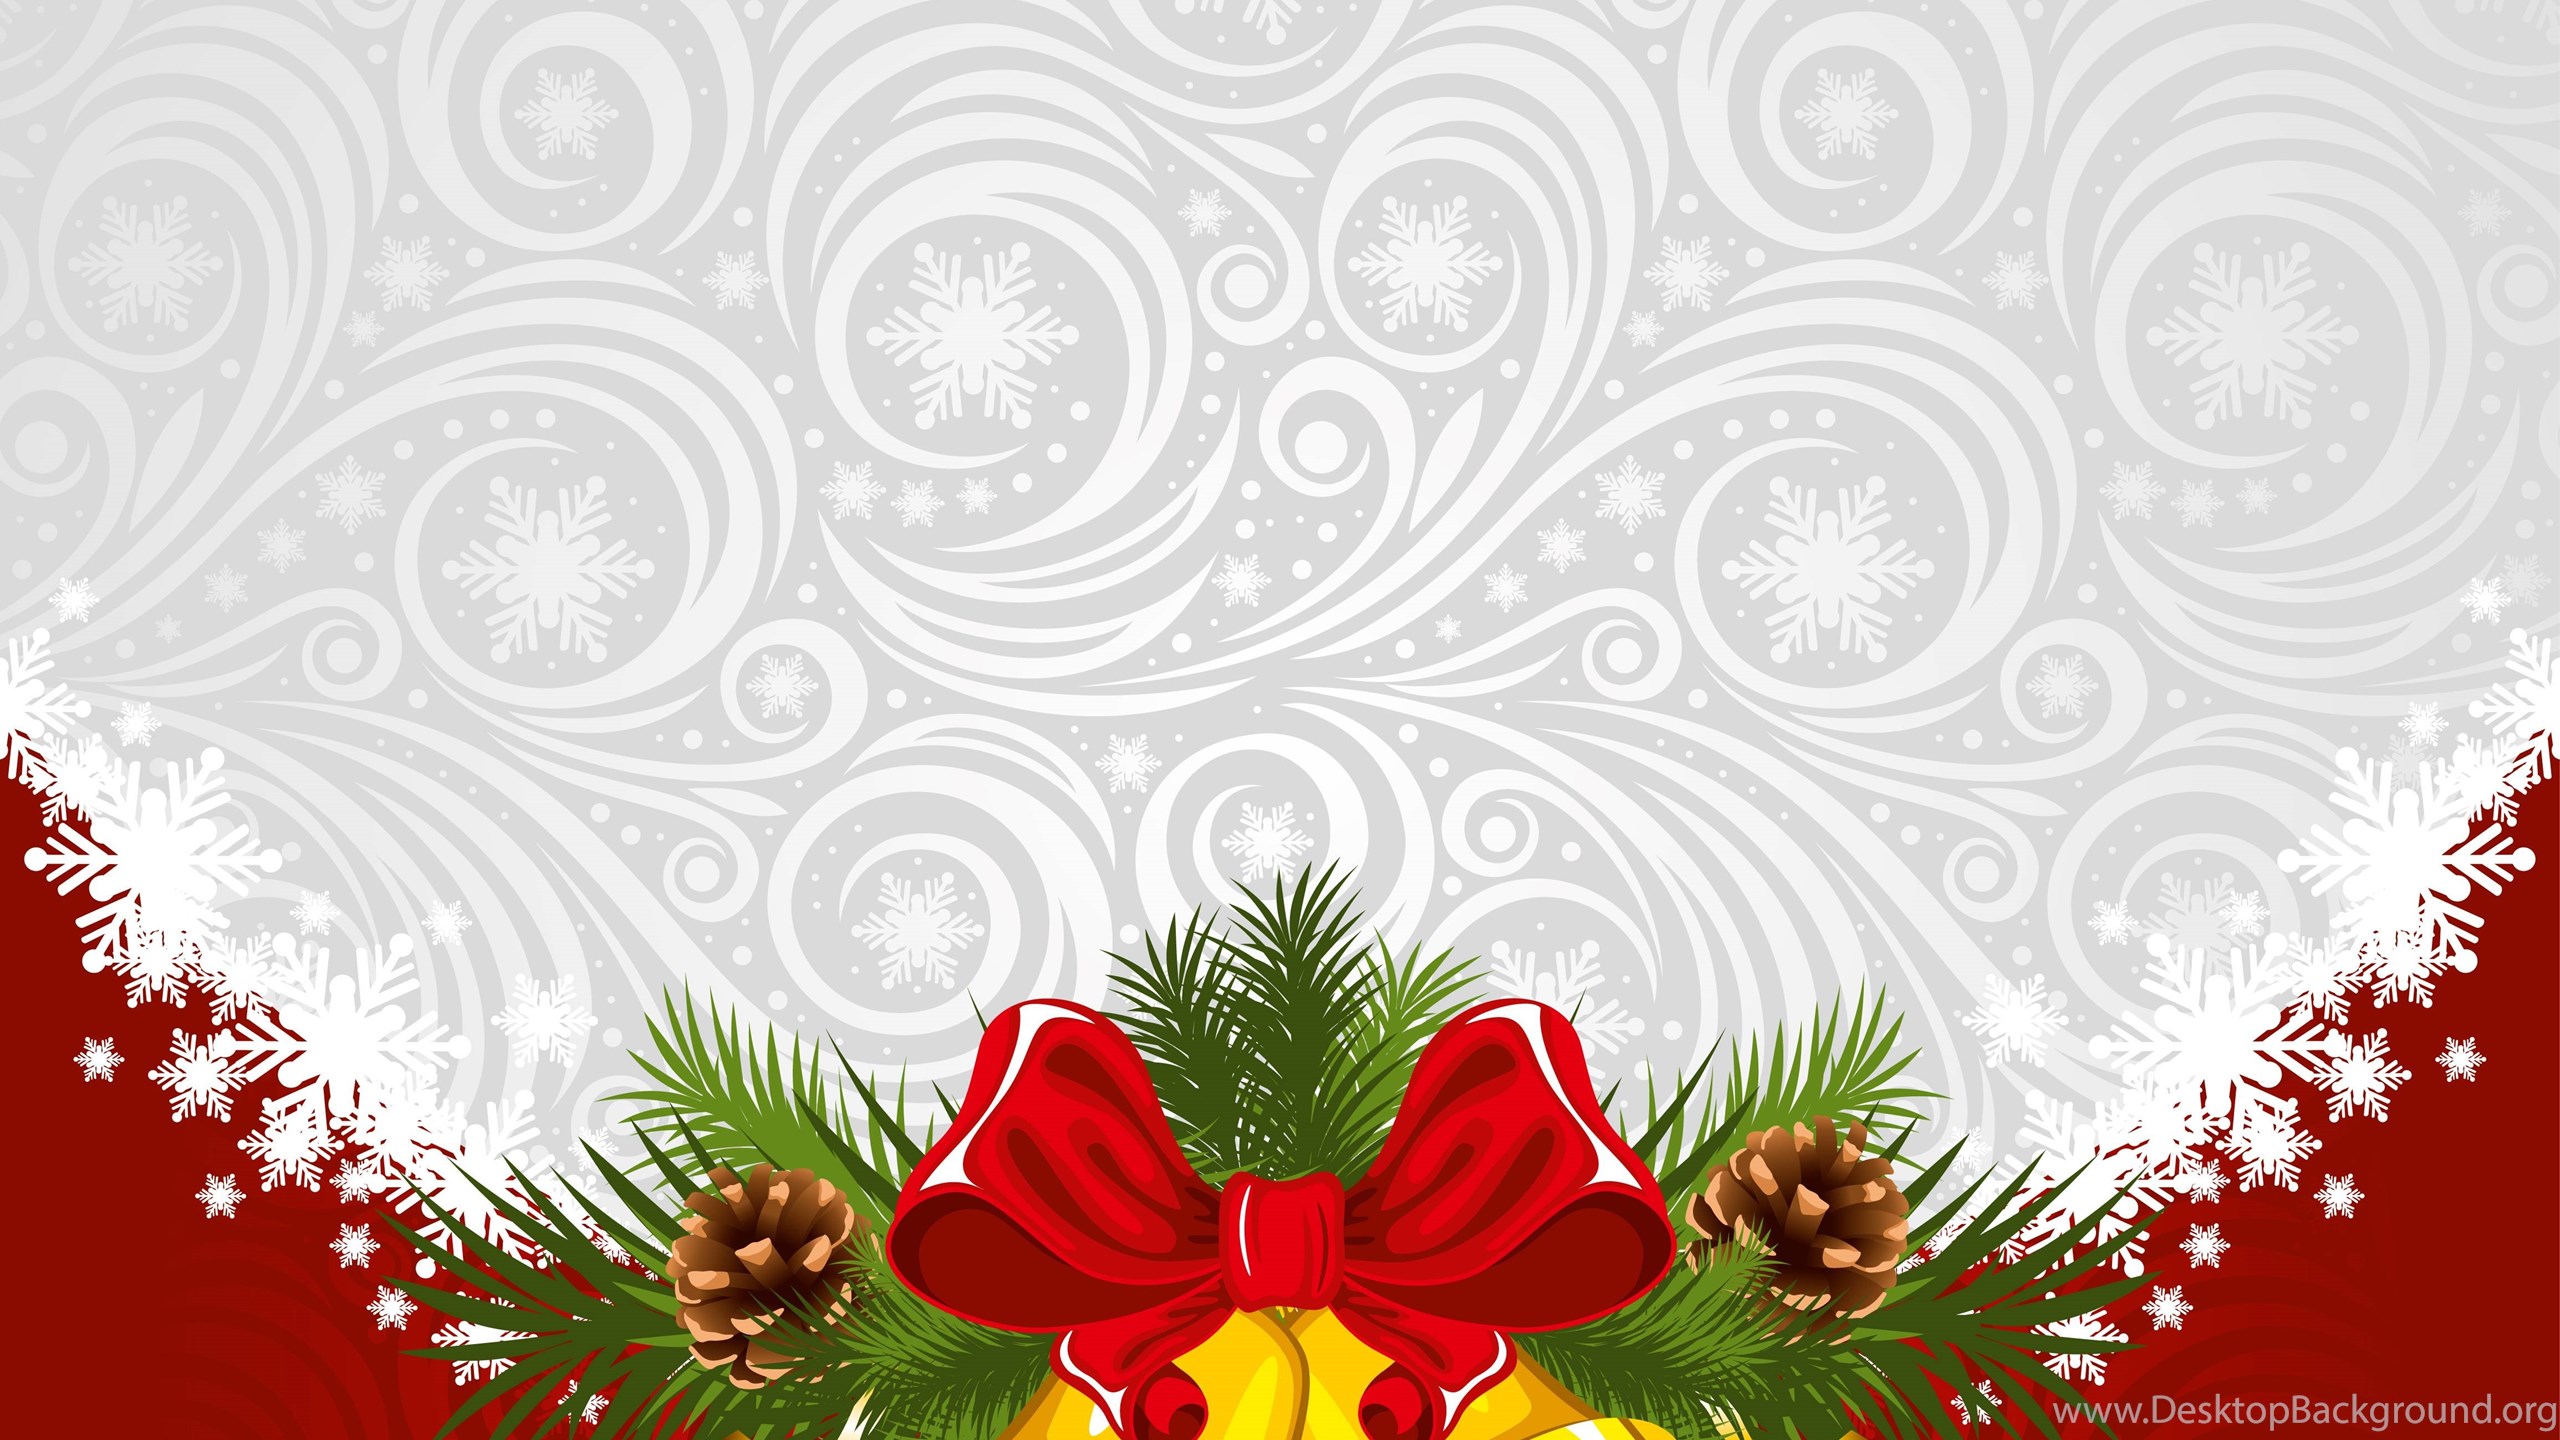 Christmas Backgrounds Free Wallpapers Cave Desktop Background